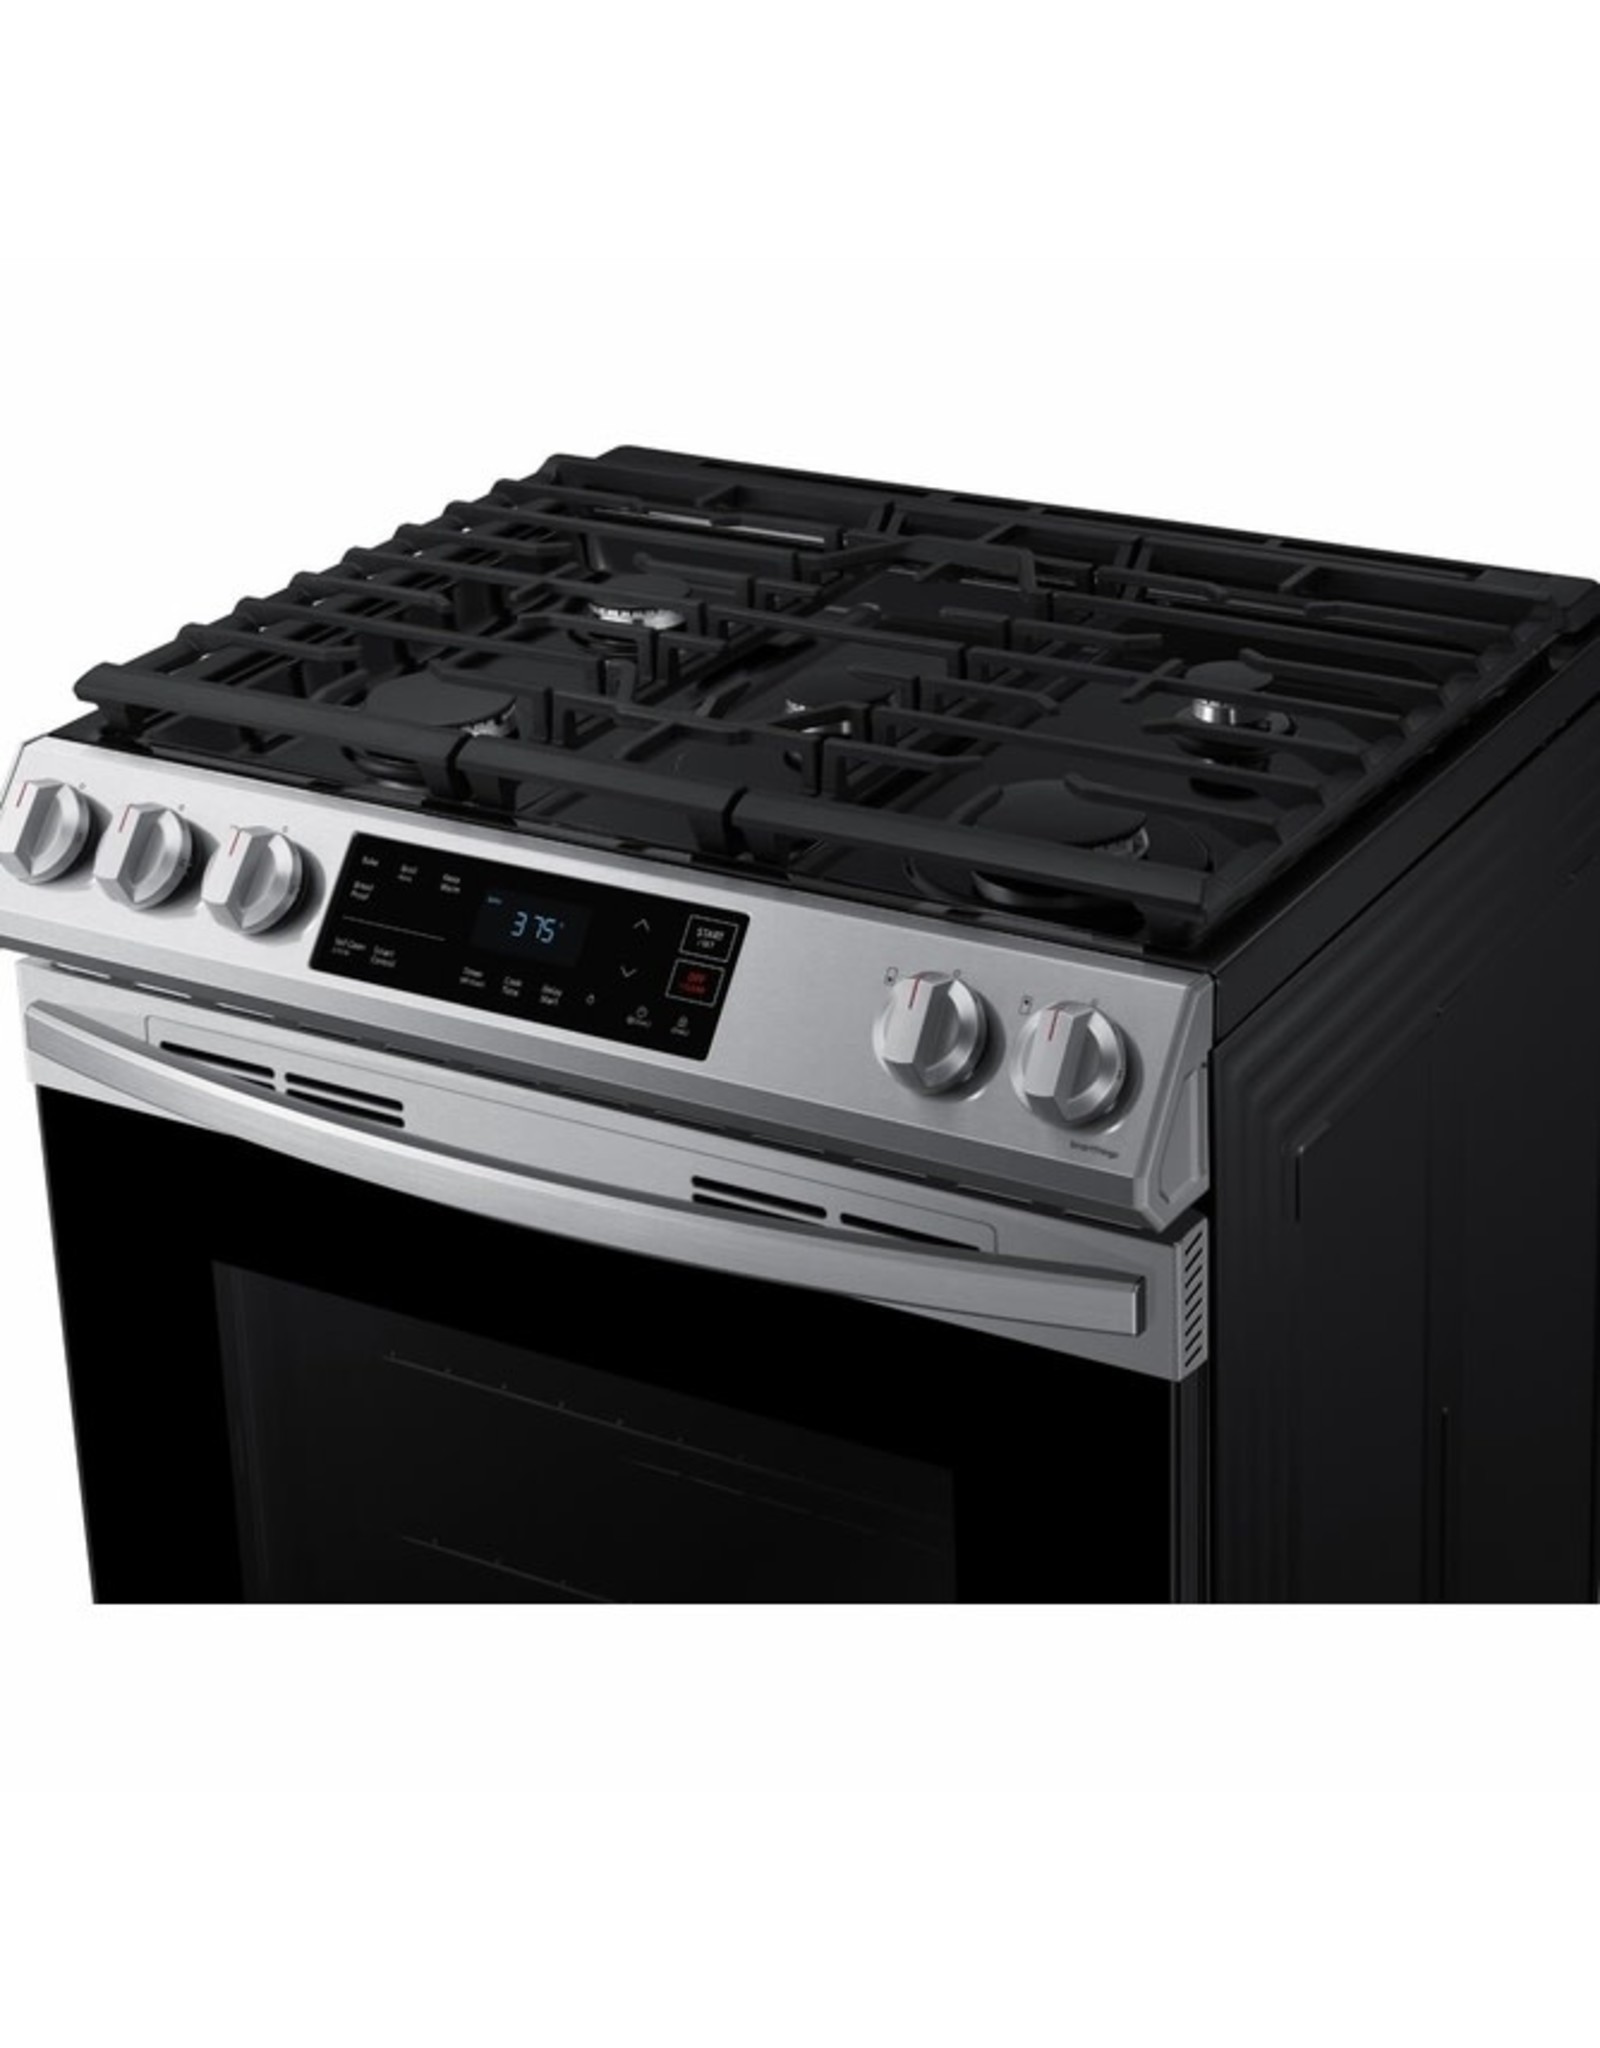 SAMSUNG NX60T8111SS SAMSUNG 30 in. 6.0 cu. ft. Slide-In Gas Range with Self-Cleaning Oven in Stainless Steel